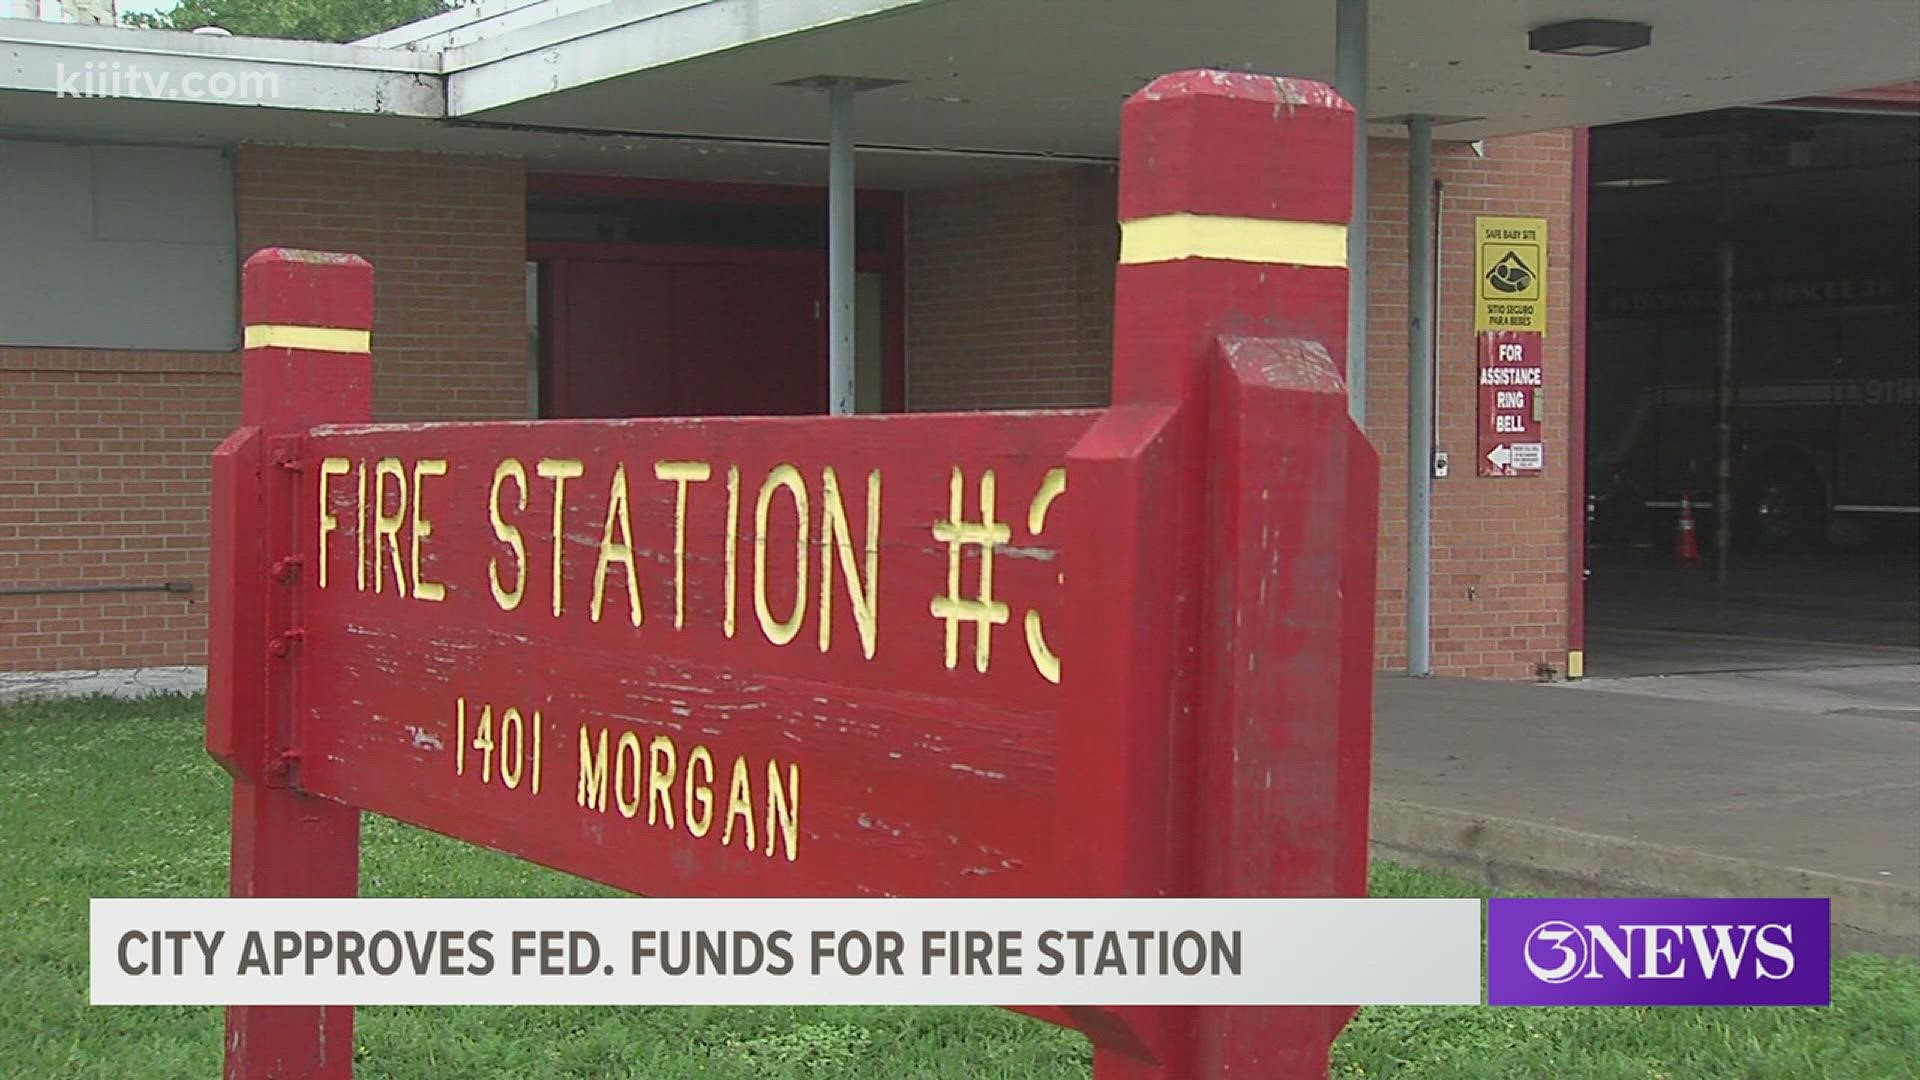 According to Fire Chief Robert Rocha, the new station will be next door to one of the busiest stations in the country.